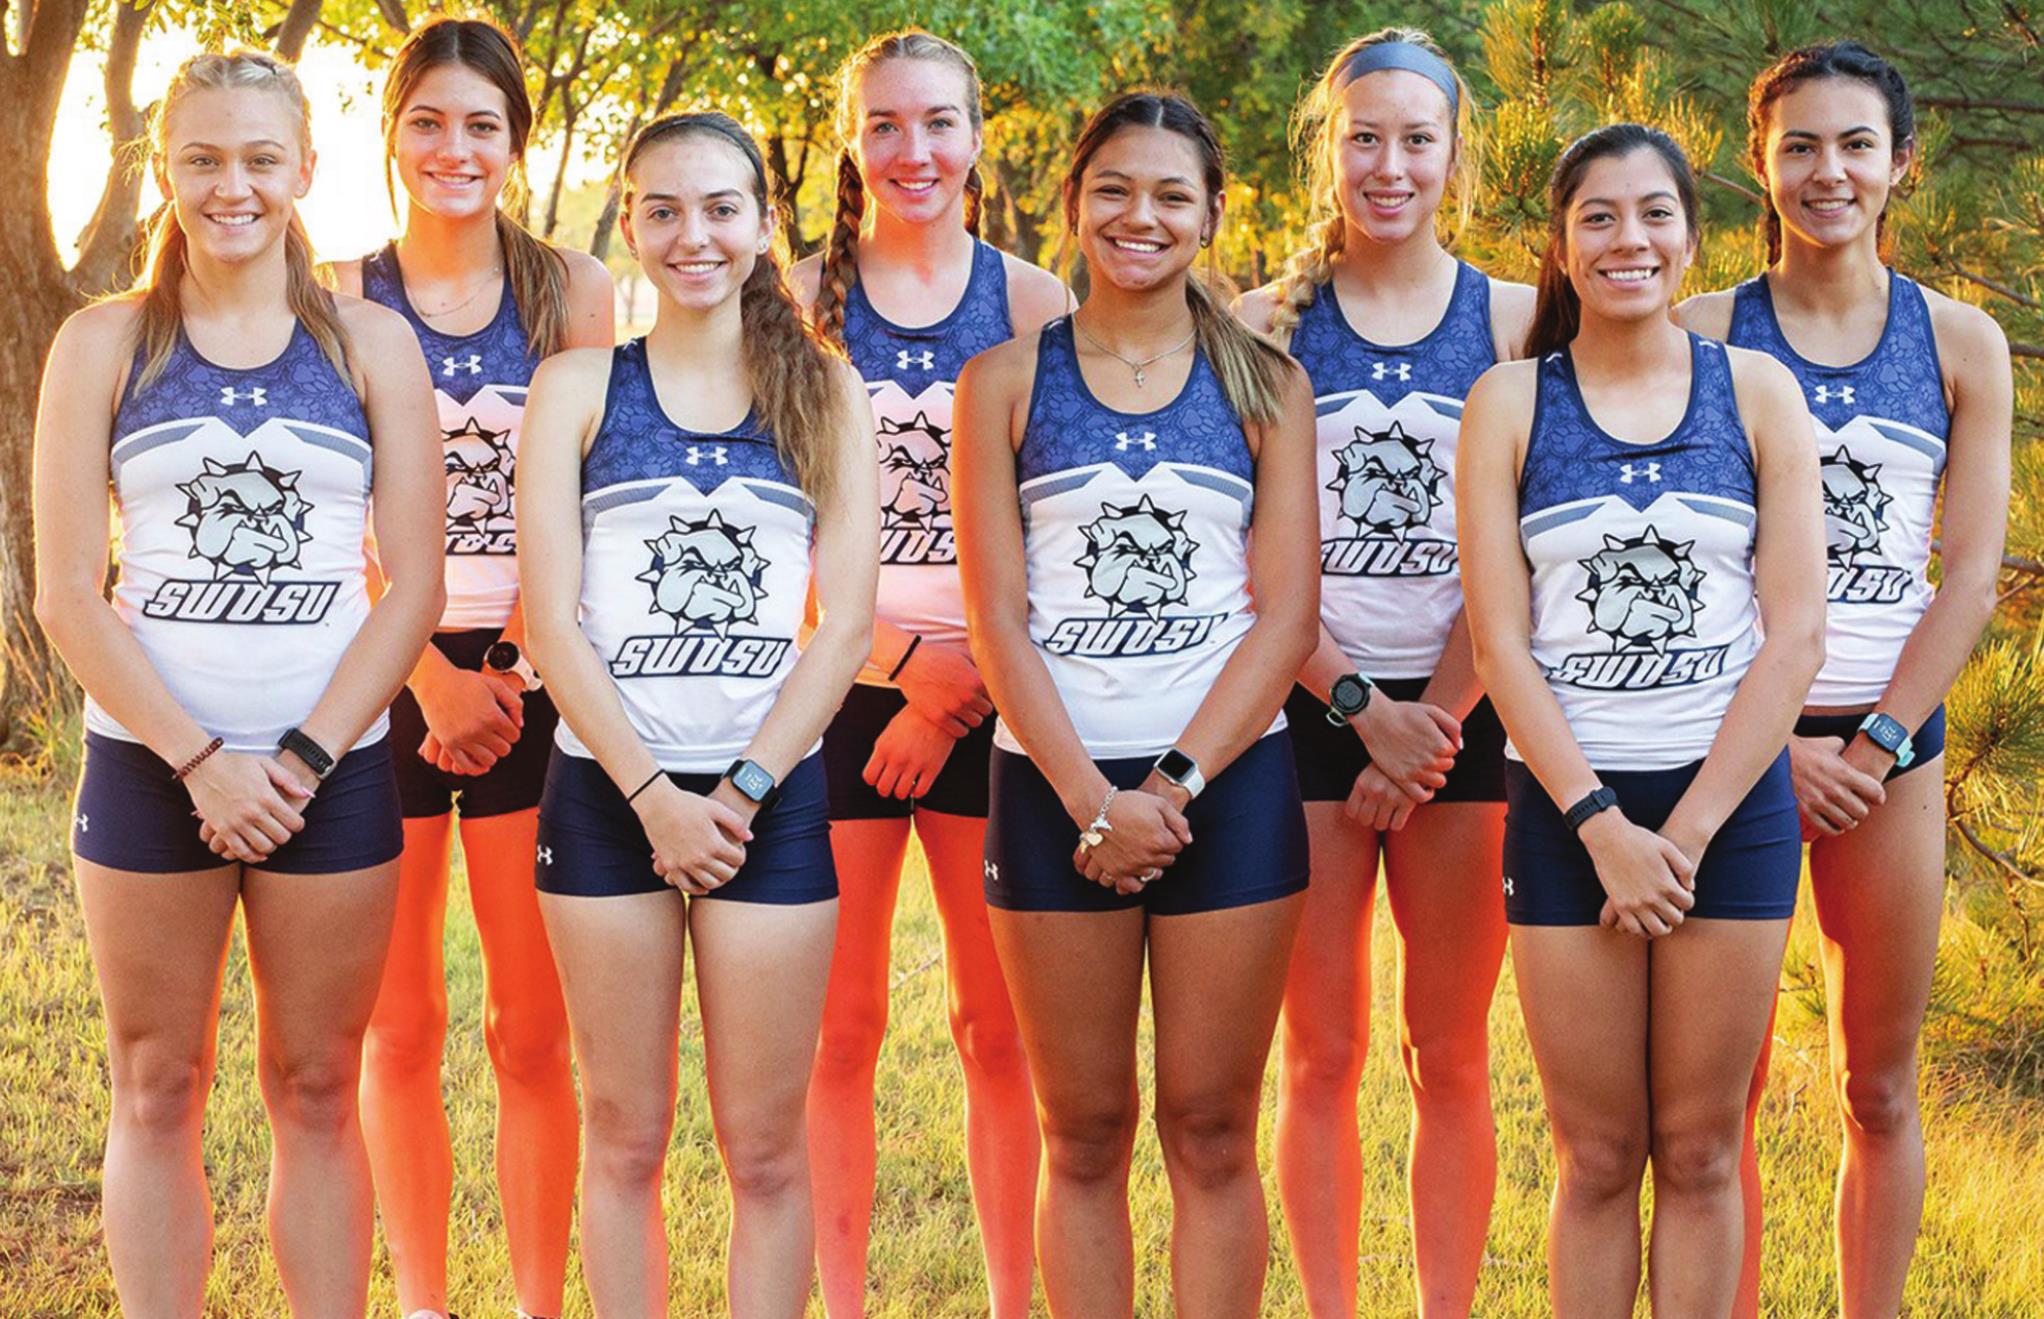 The SWOSU cross country team will begin the 2021 season Friday at the OBU Invitational in Shawnee. Provided